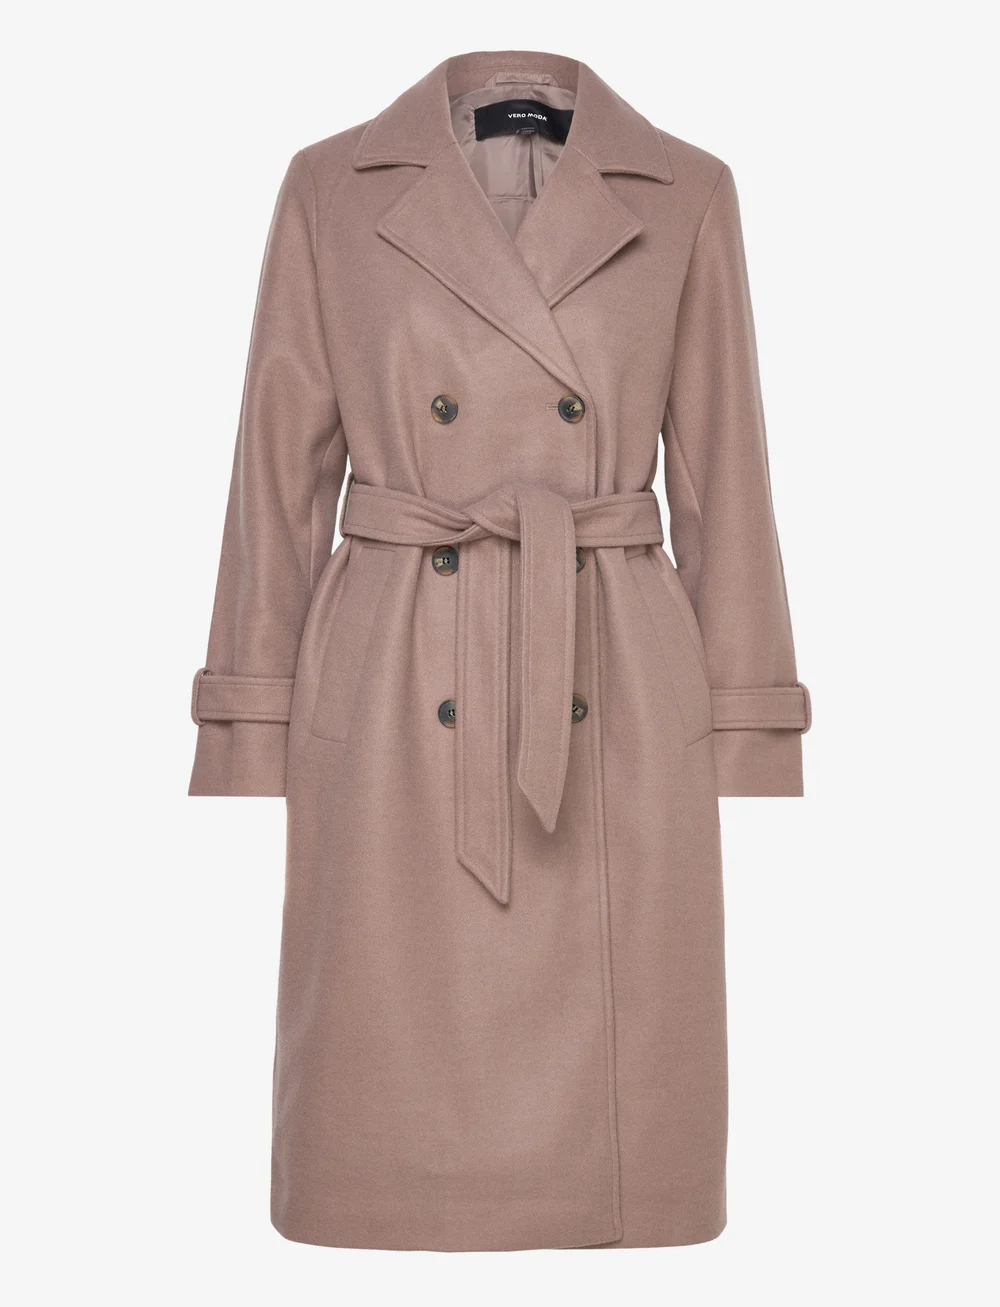 Vero Moda Vmfortunevega Aw23 Longtrenchcoat Gaboos - 32.00 €. Buy Winter  Coats from Vero Moda online at Boozt.com. Fast delivery and easy returns